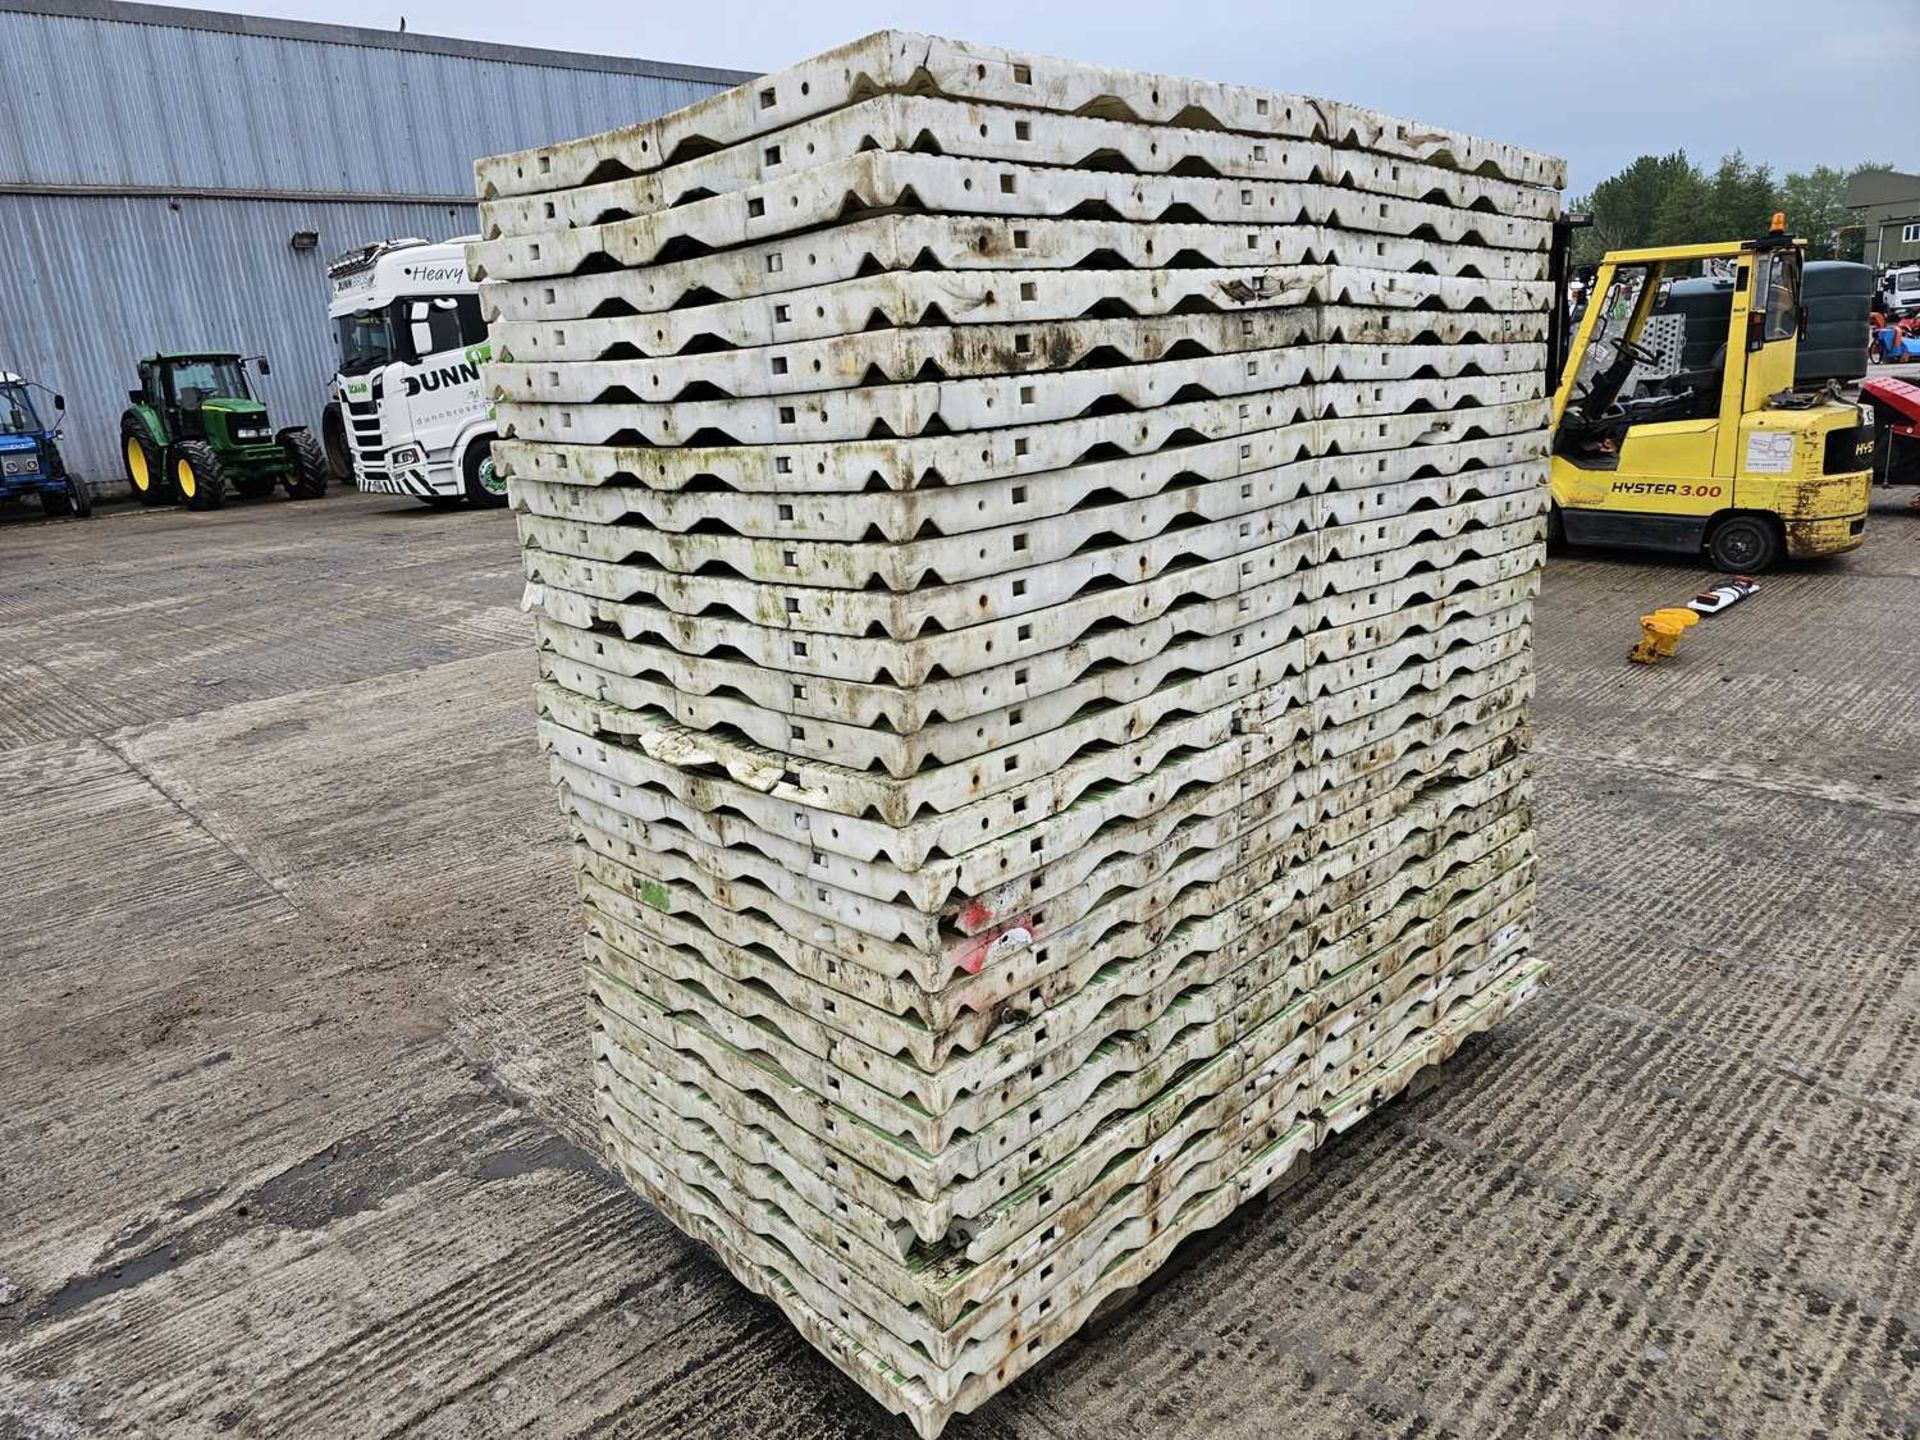 Pallet of Ground Protection Mats (2m x 1m)